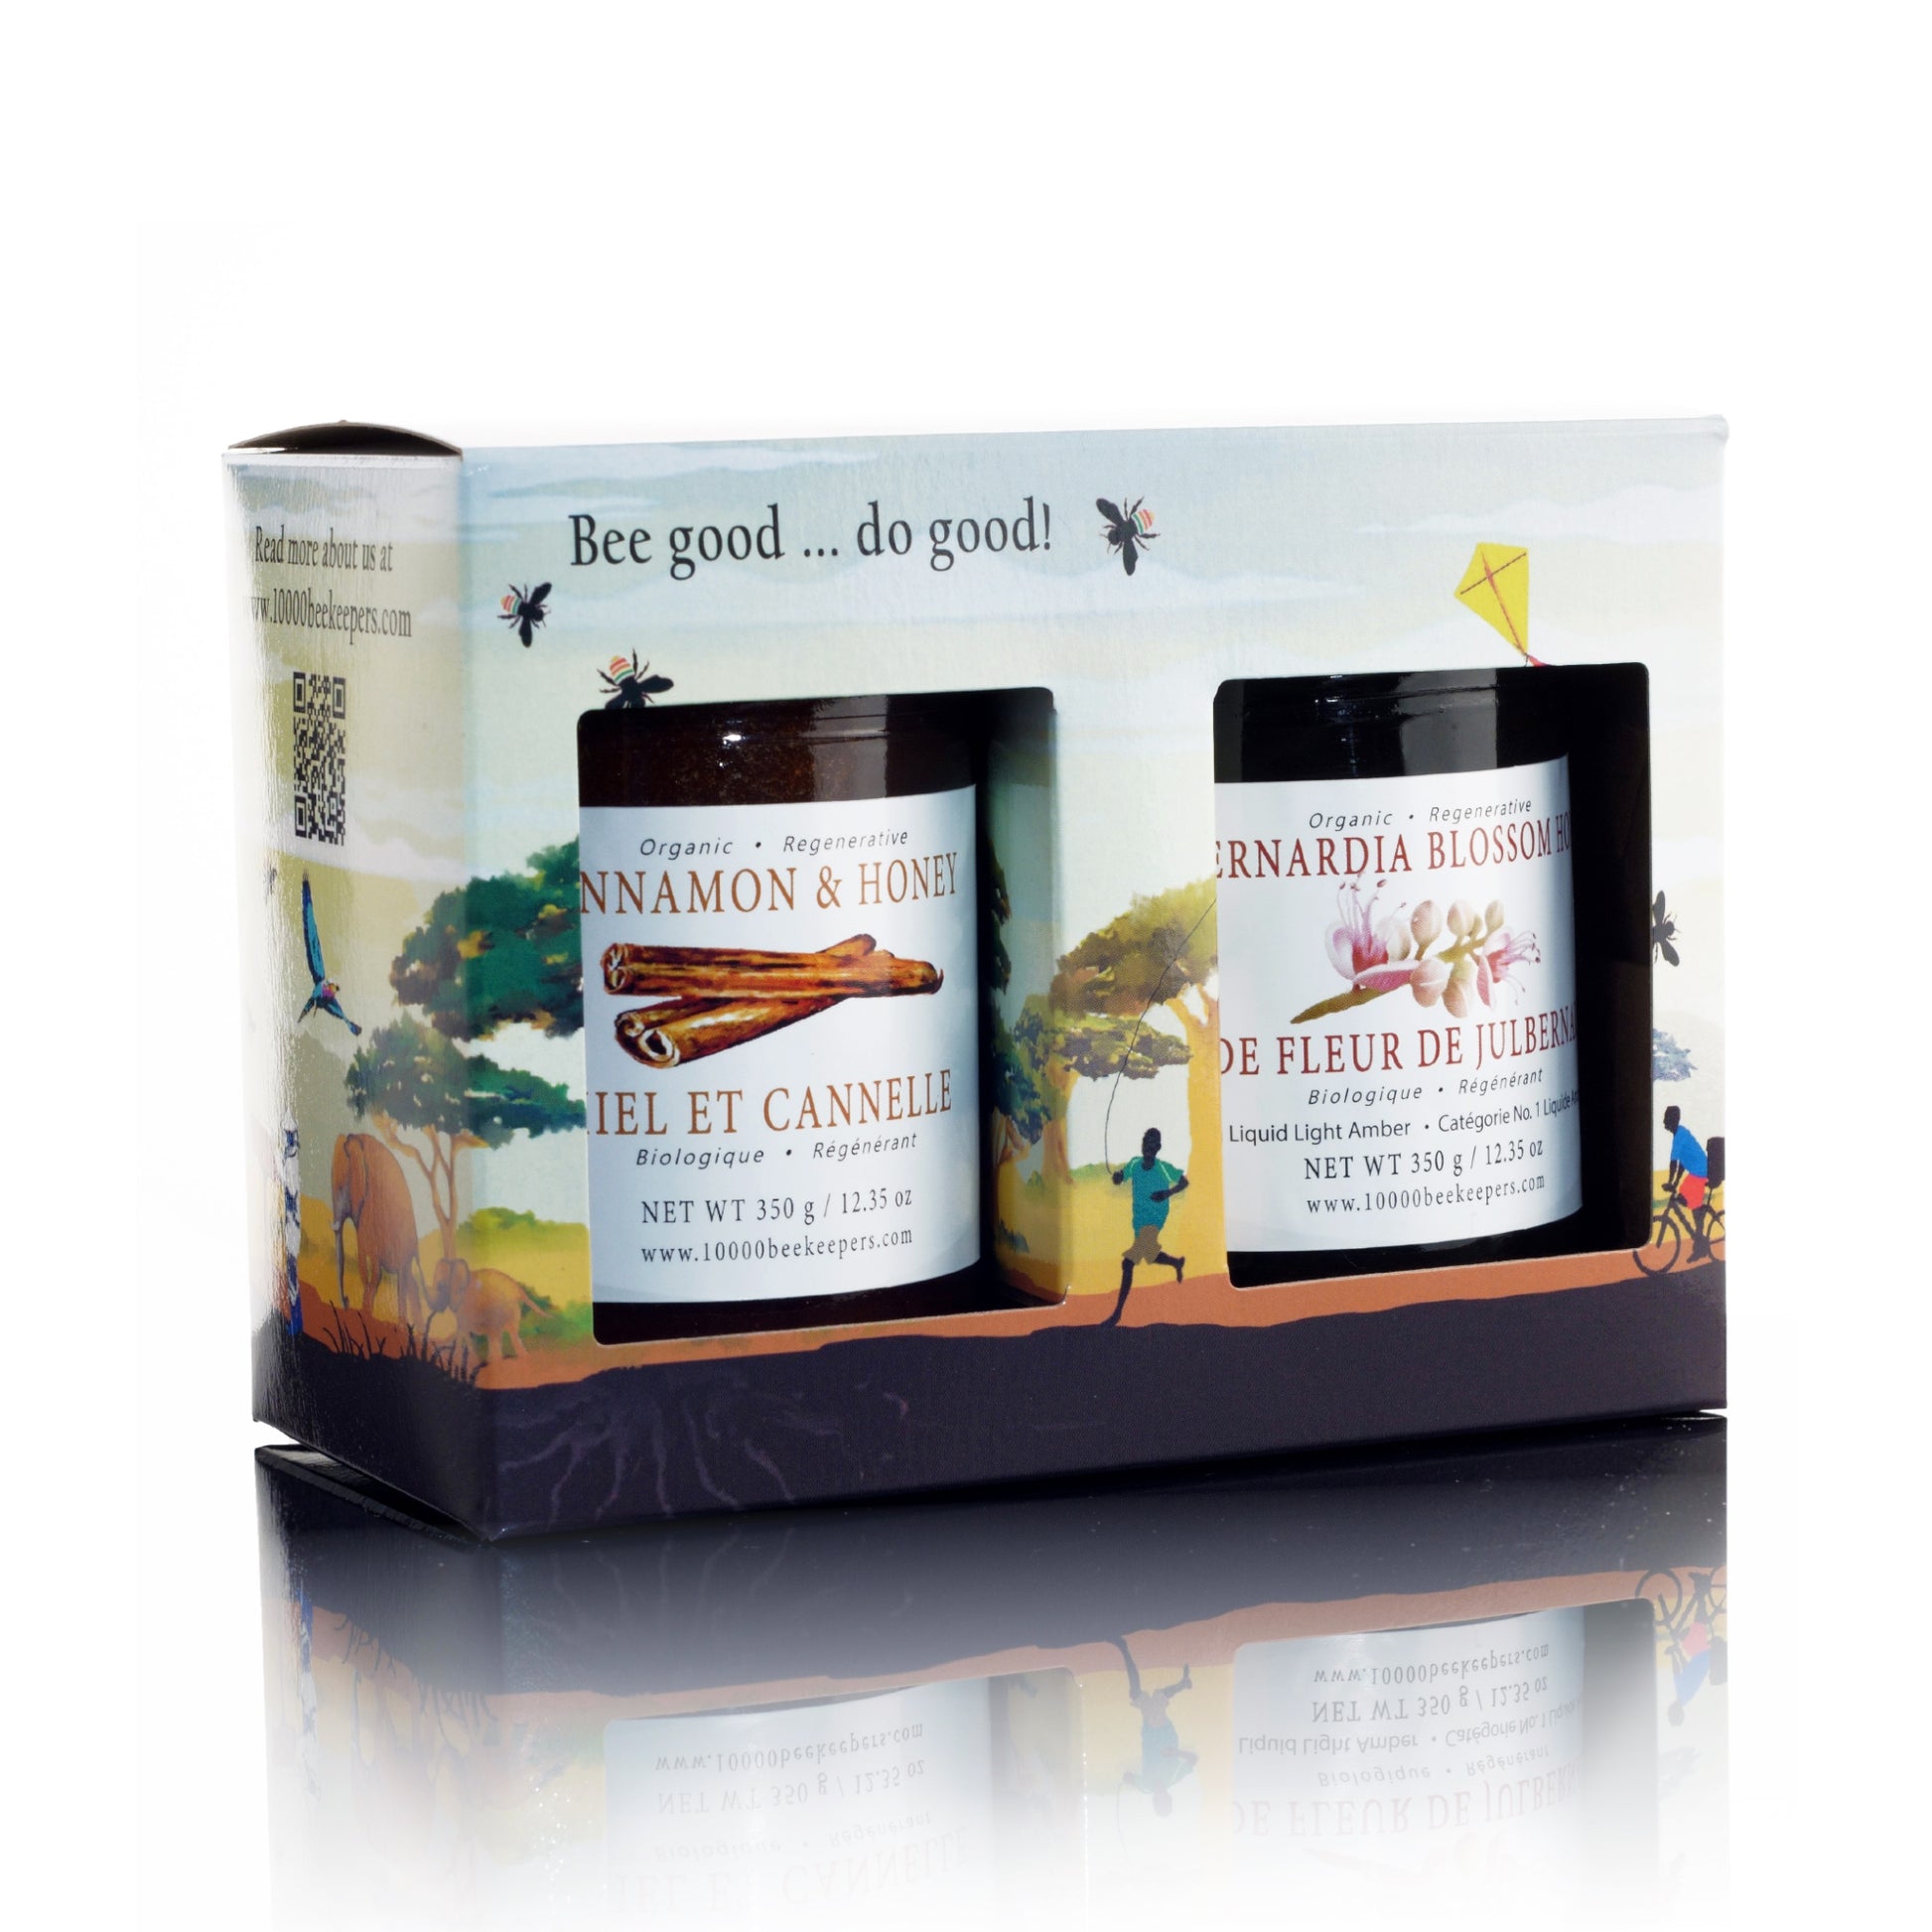  A gift set of two large jars of premium raw honey varieties, packaged for gifting